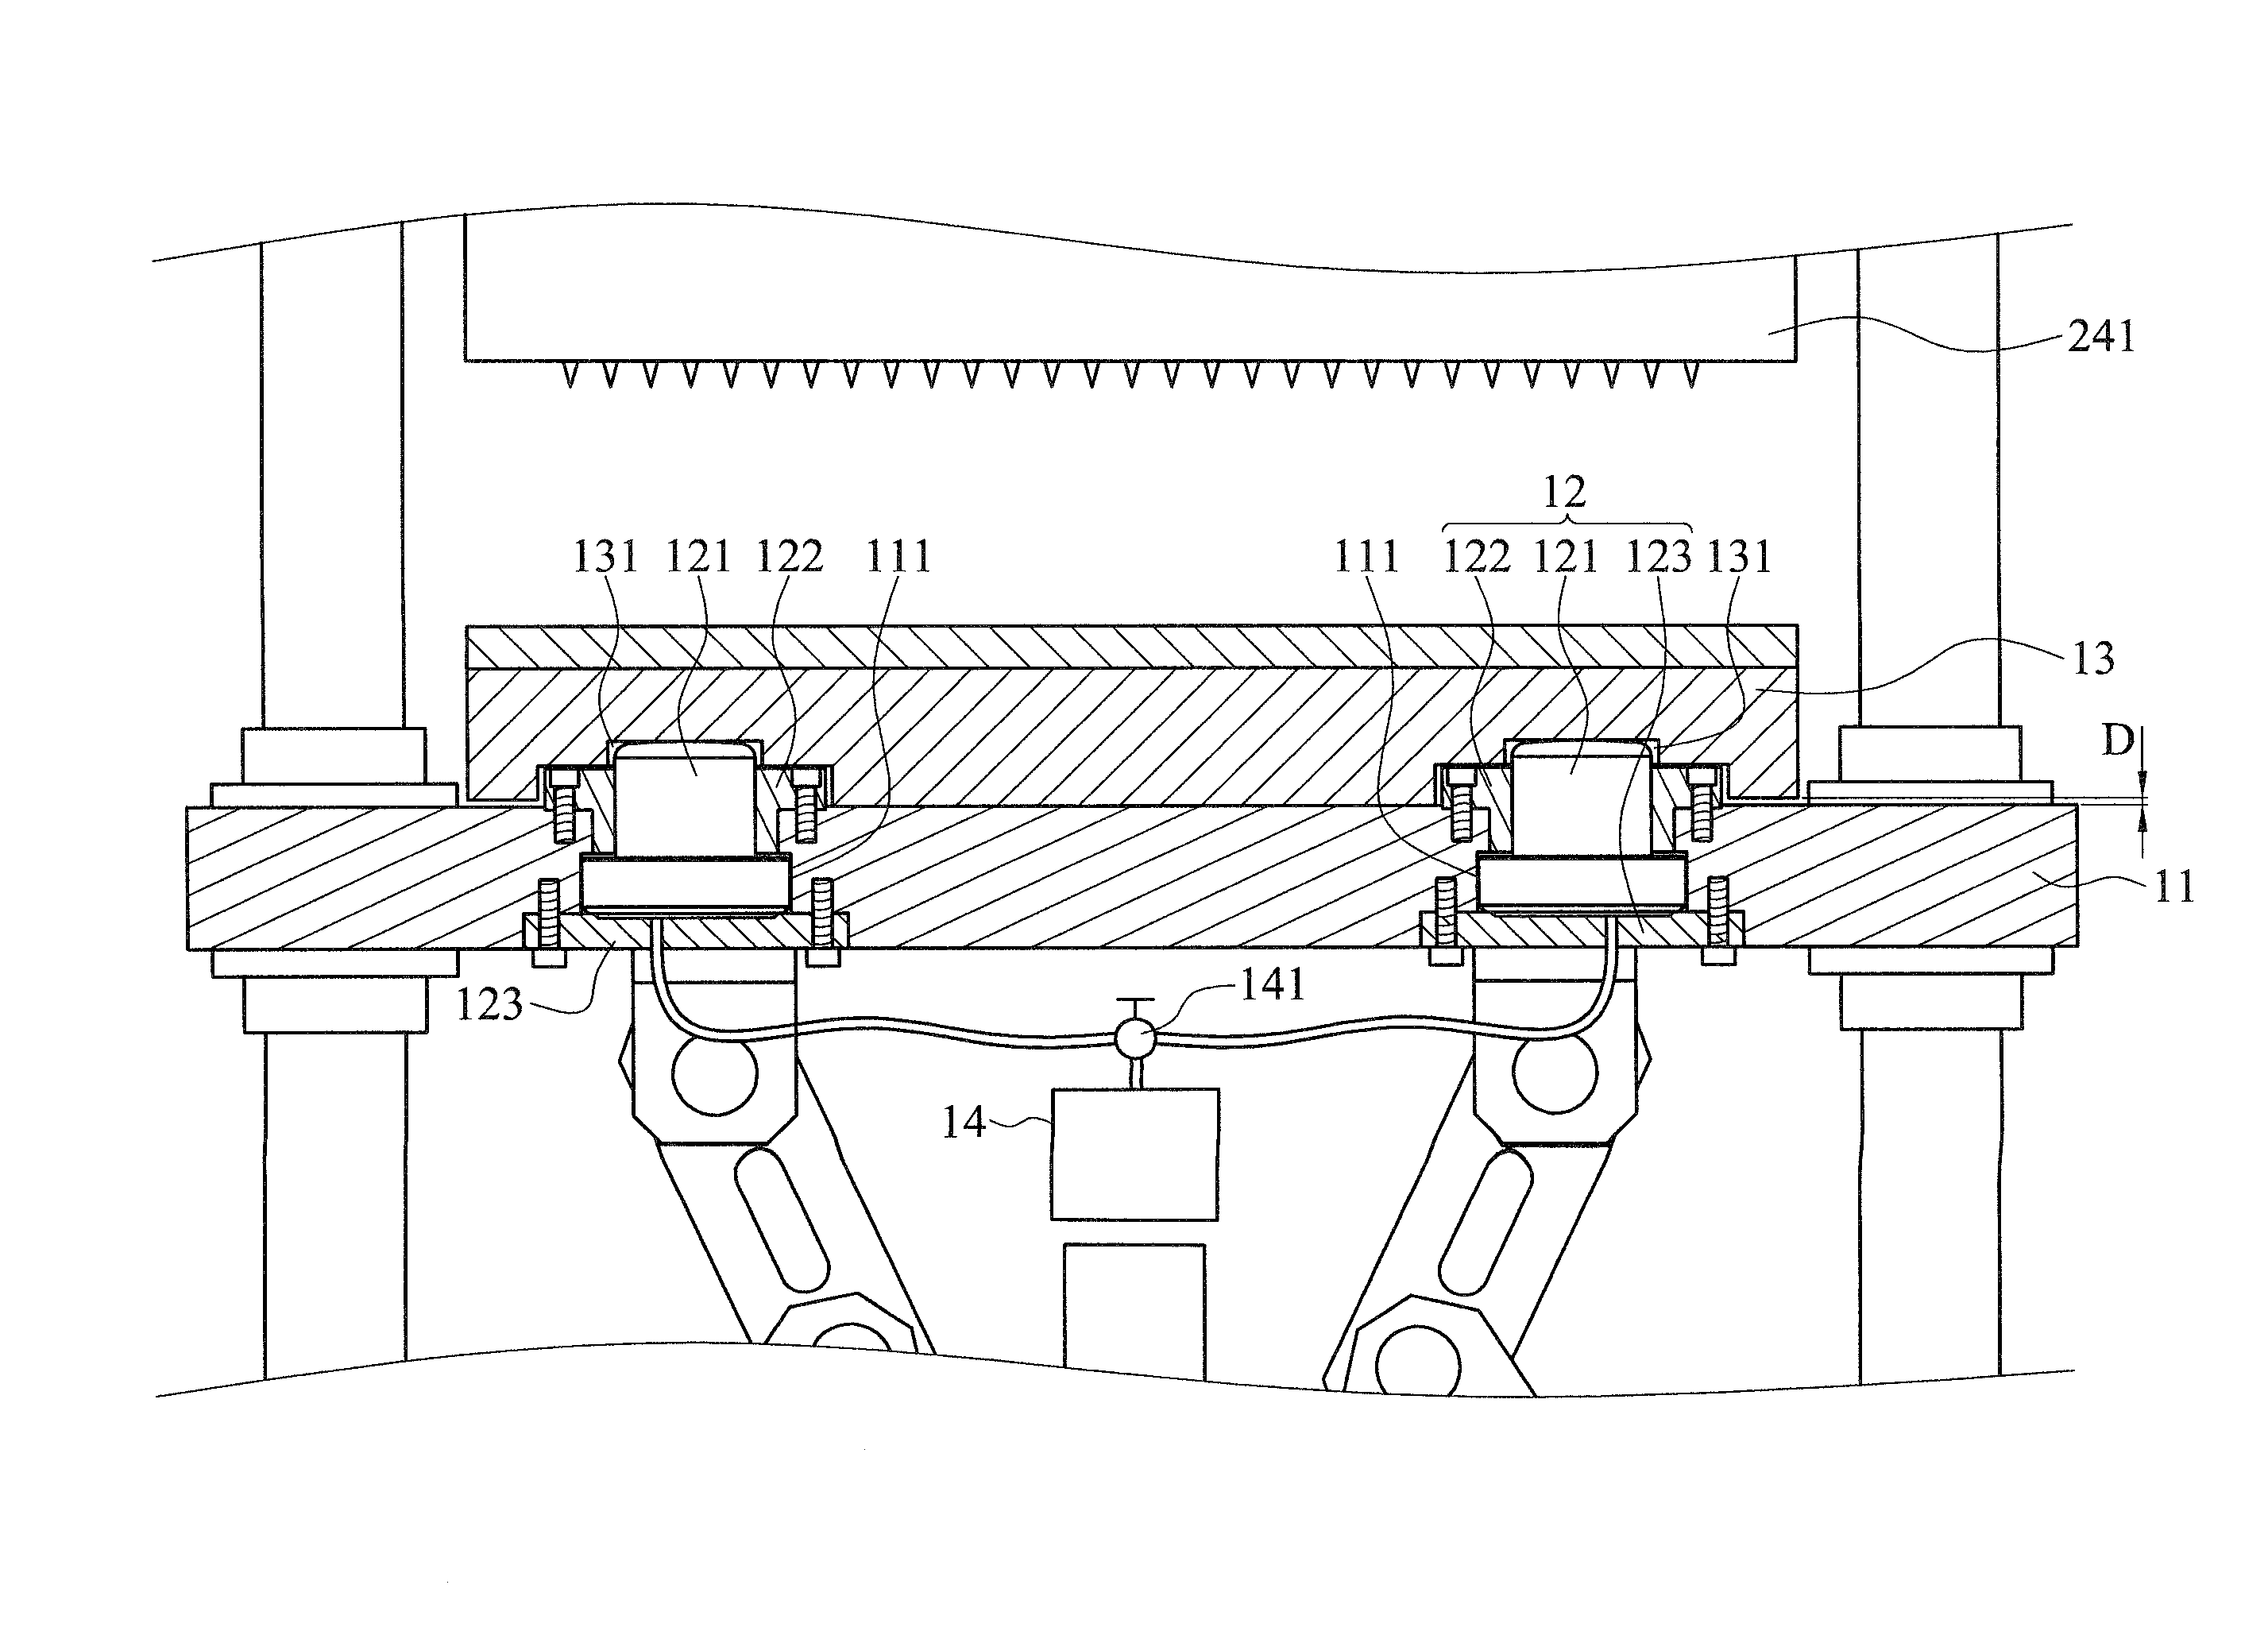 Buffer assembly of vacuum molding and cutting machine